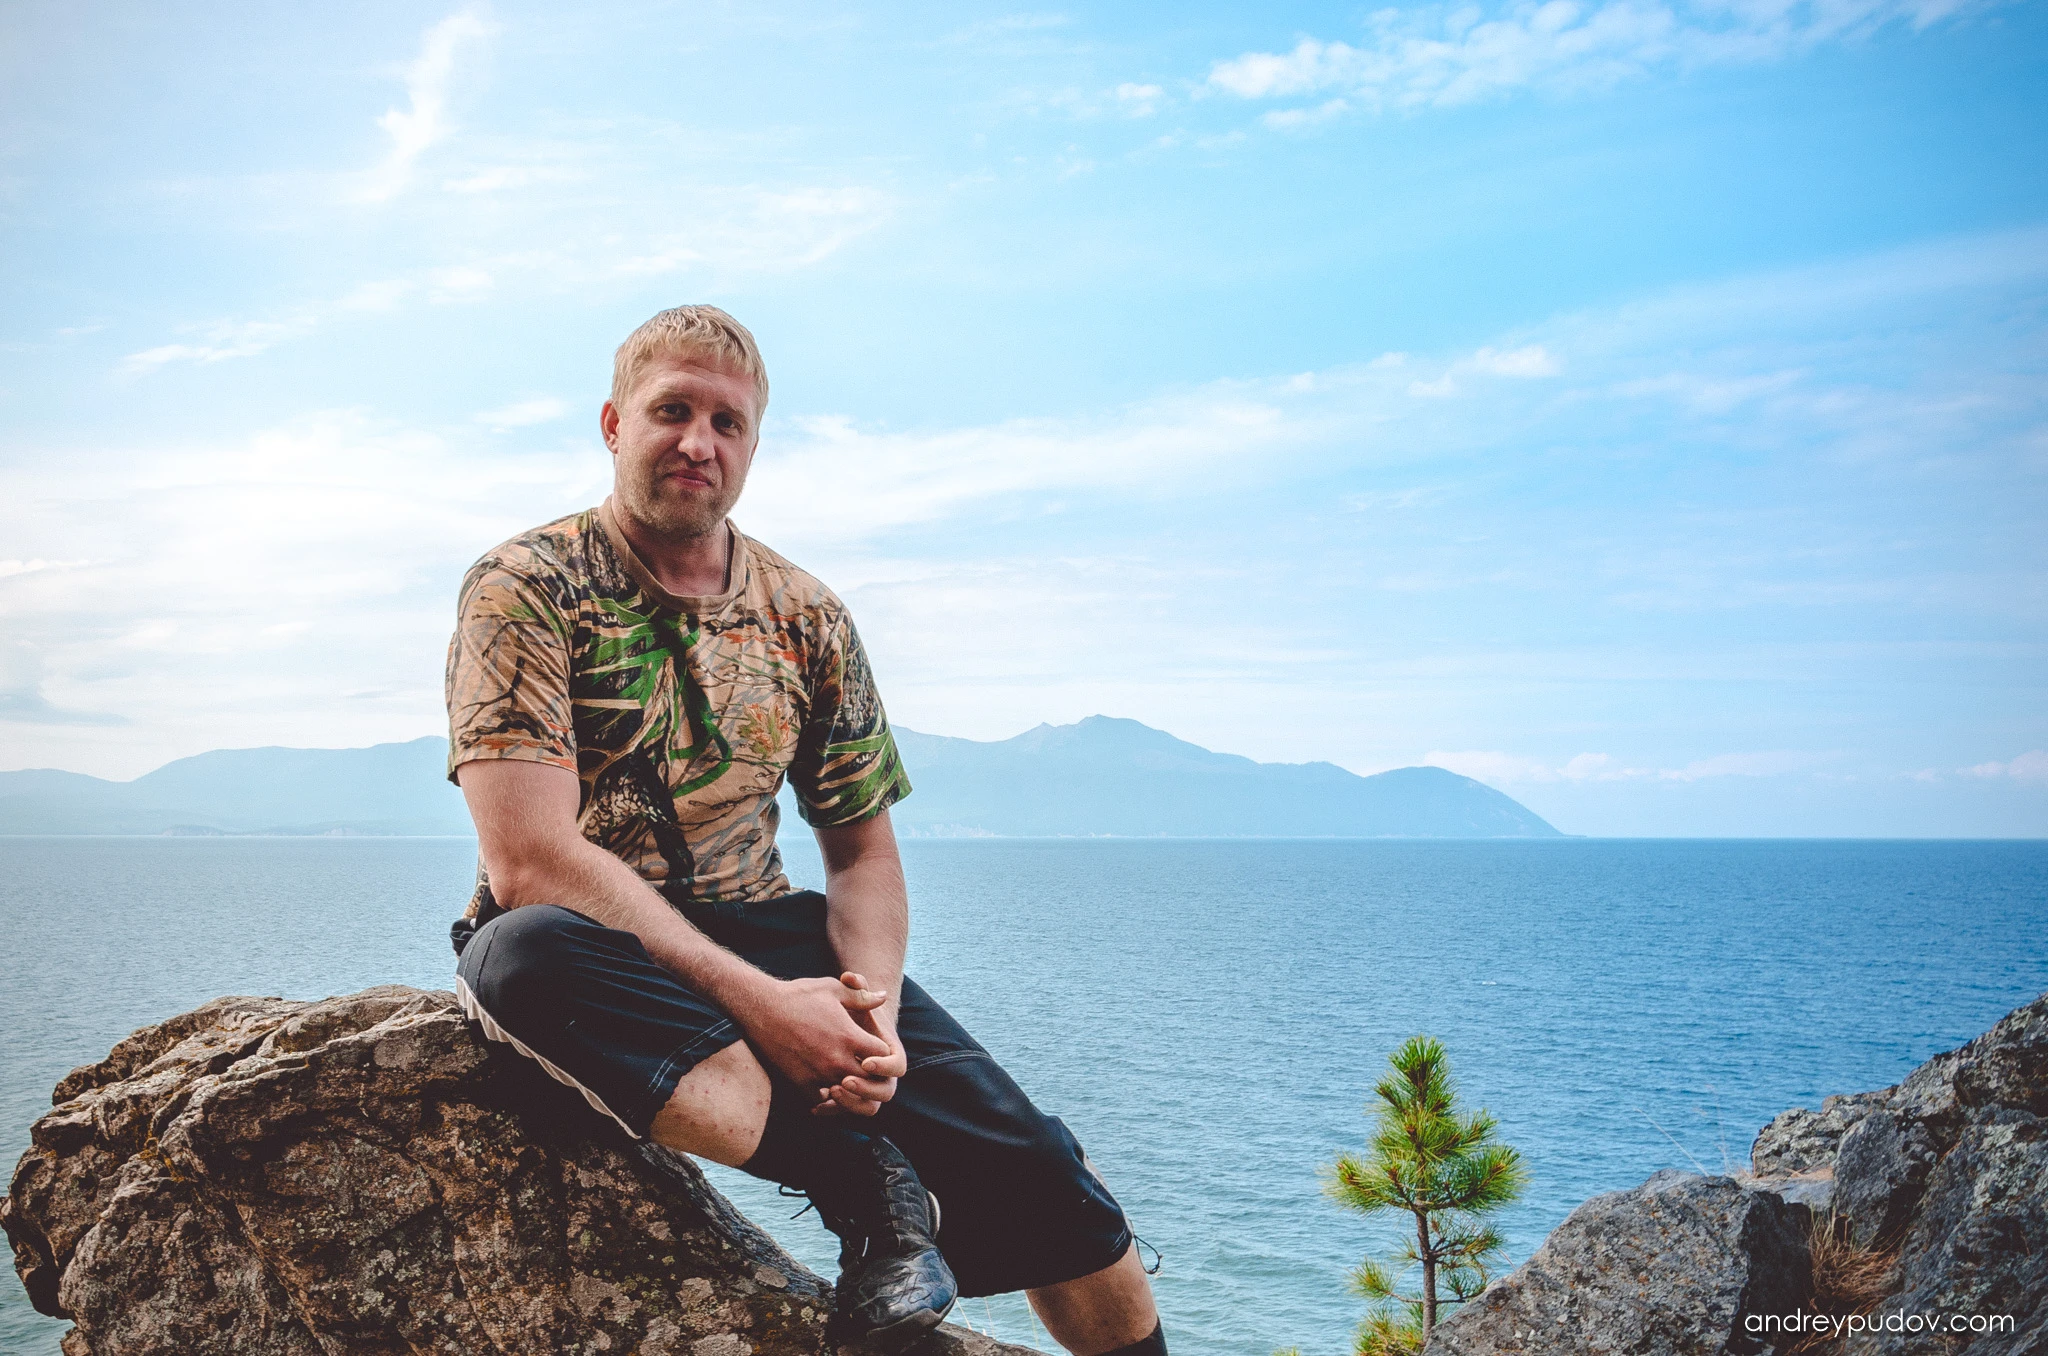 Lake Baikal Team - Vyacheslav Chukharev is a group sweep, carefully kept a count of the squad, ensuring the entire group makes it safely to the final destination.